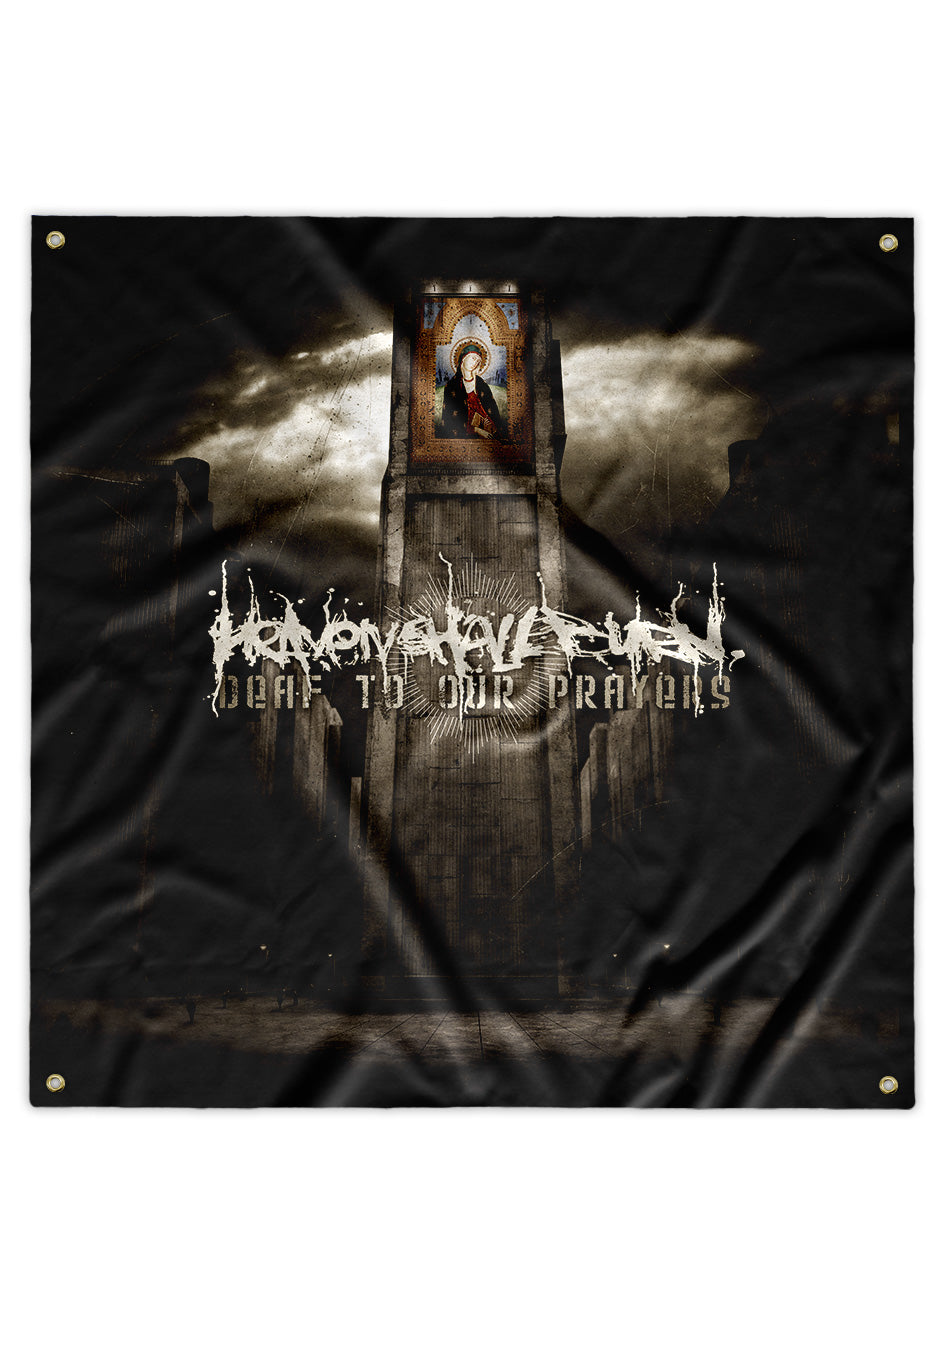 Heaven Shall Burn - Deaf To Our Prayers Cover - Flag